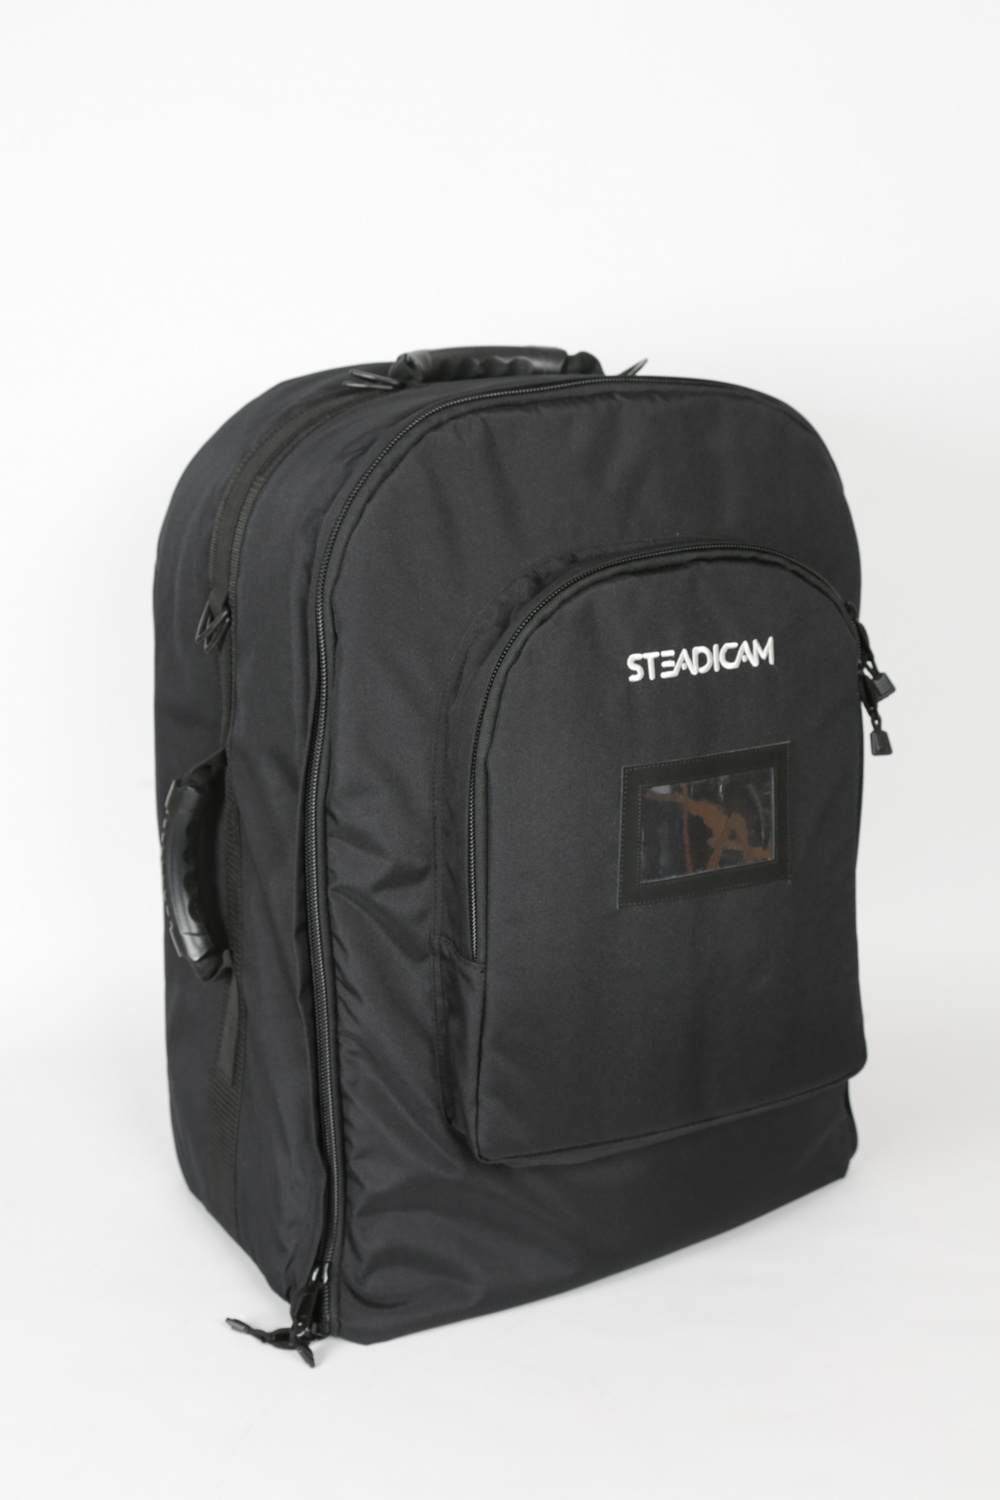 Steadicam padded backpack. Supplied as standard with the Exovest ...